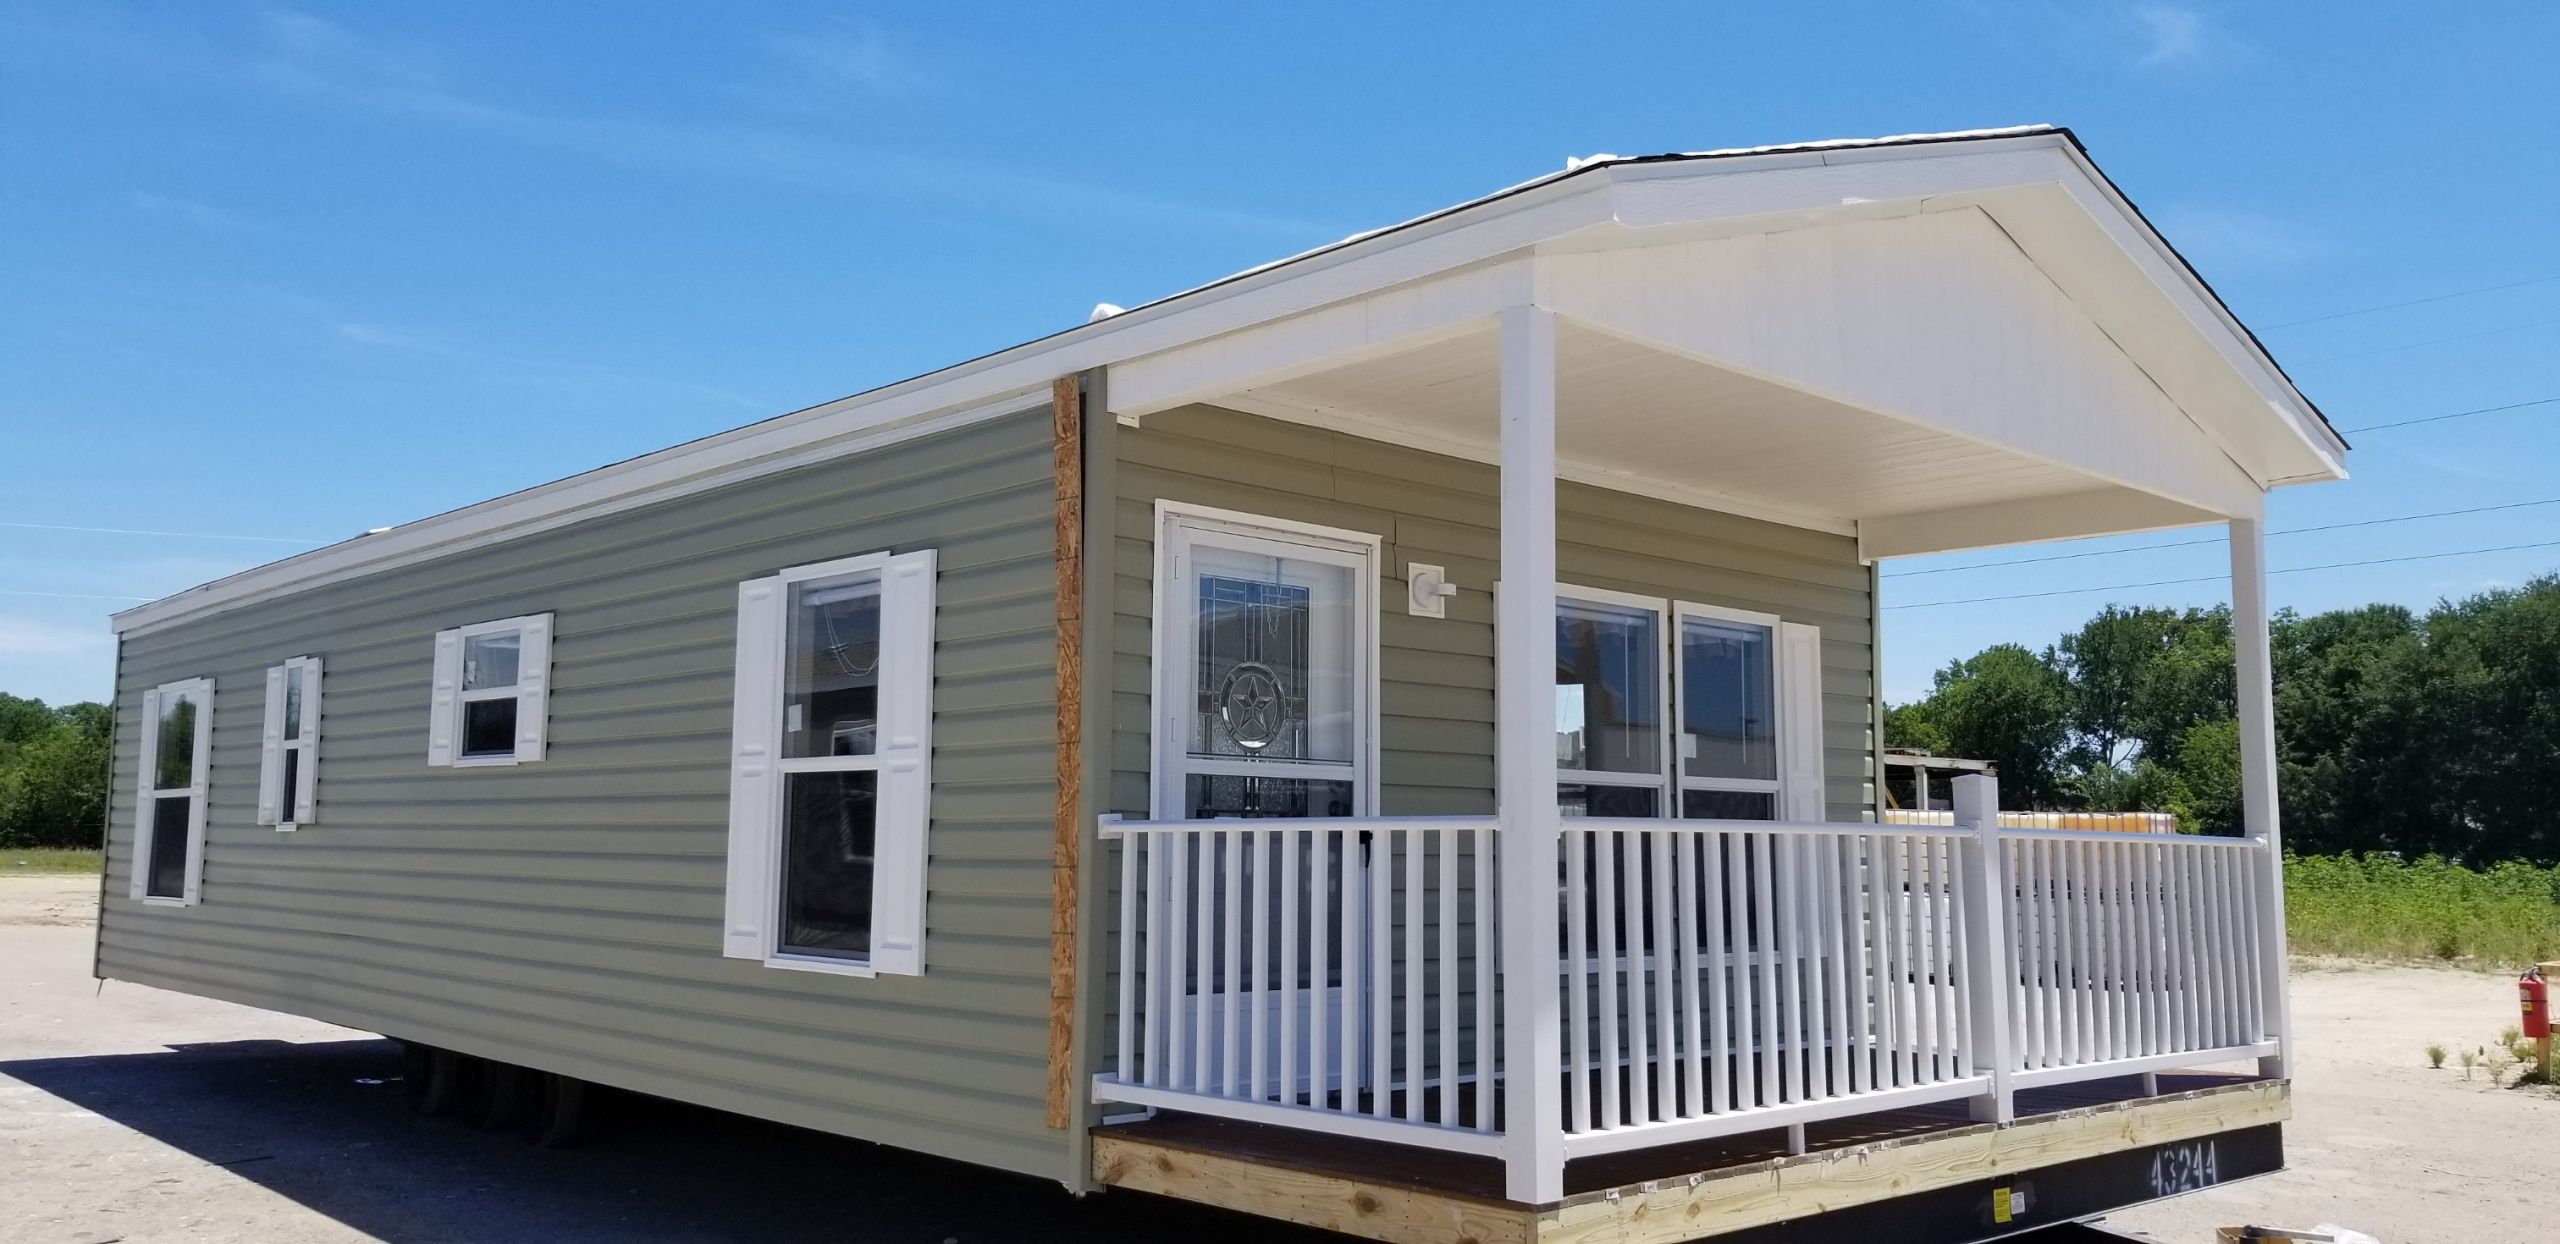 The Weston Tiny Fleetwood Homes Manufactured Housing Consultant